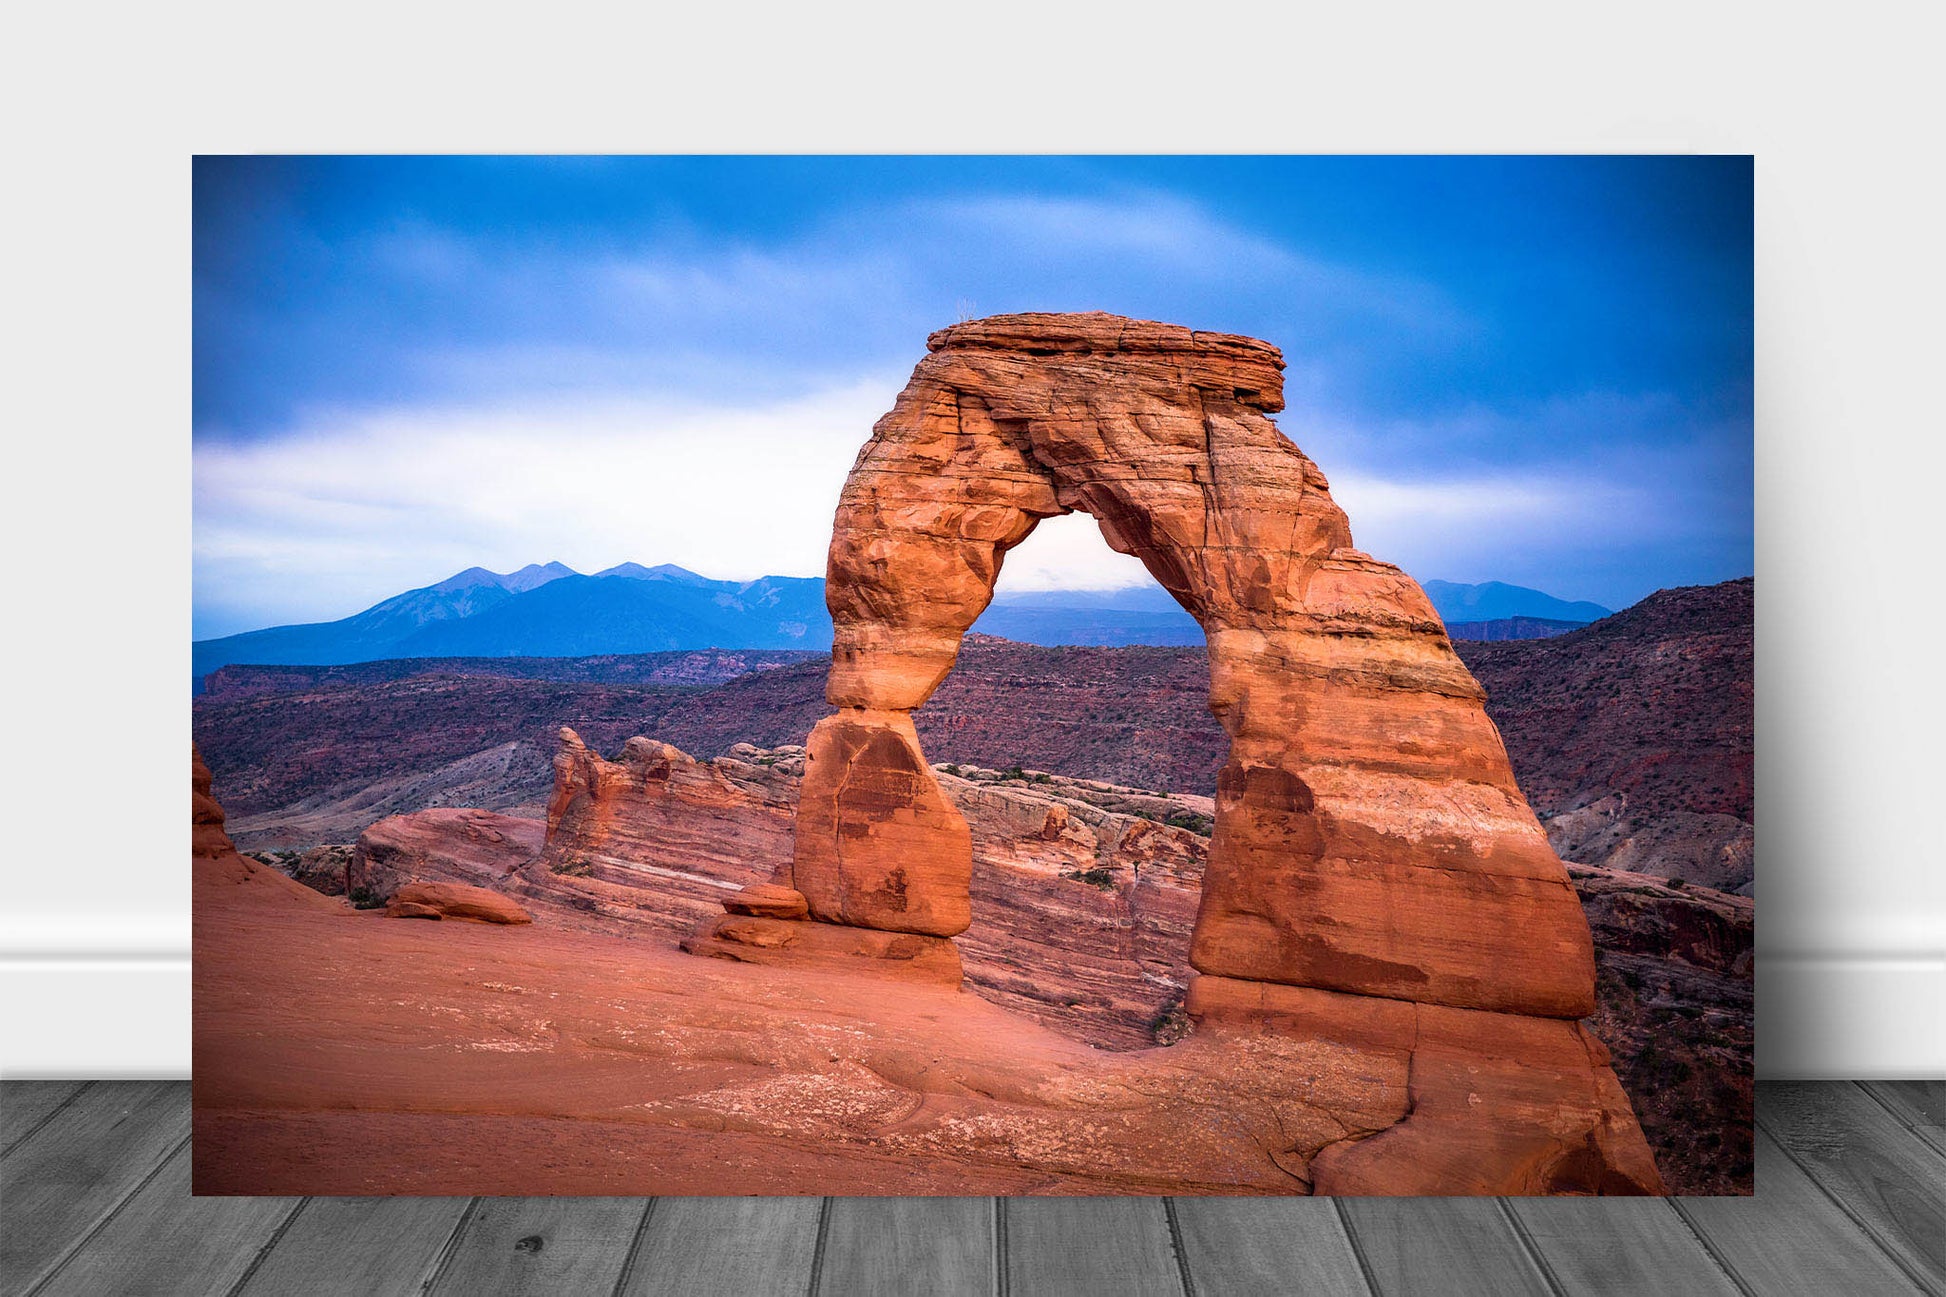 Landscape metal print of Delicate Arch glowing on a rainy evening in Arches National Park near Moab, Utah by Sean Ramsey of Southern Plains Photography.